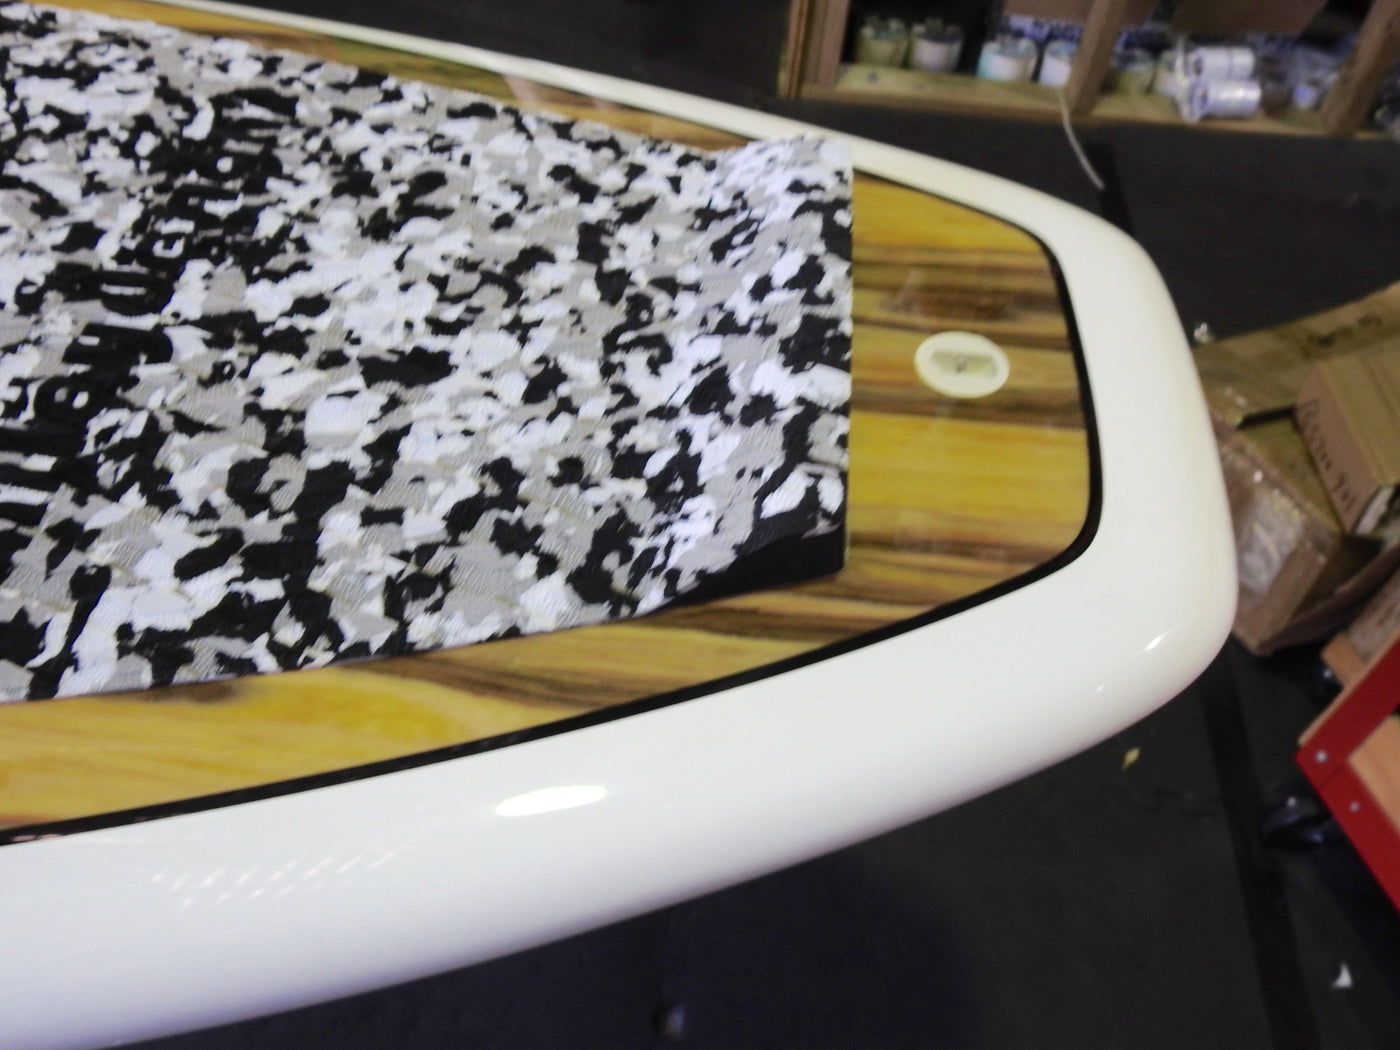 10’6" x 32” Timber Performance White Turtle White Alleydesigns SUP 11KG - Alleydesigns  Pty Ltd                                             ABN: 44165571264